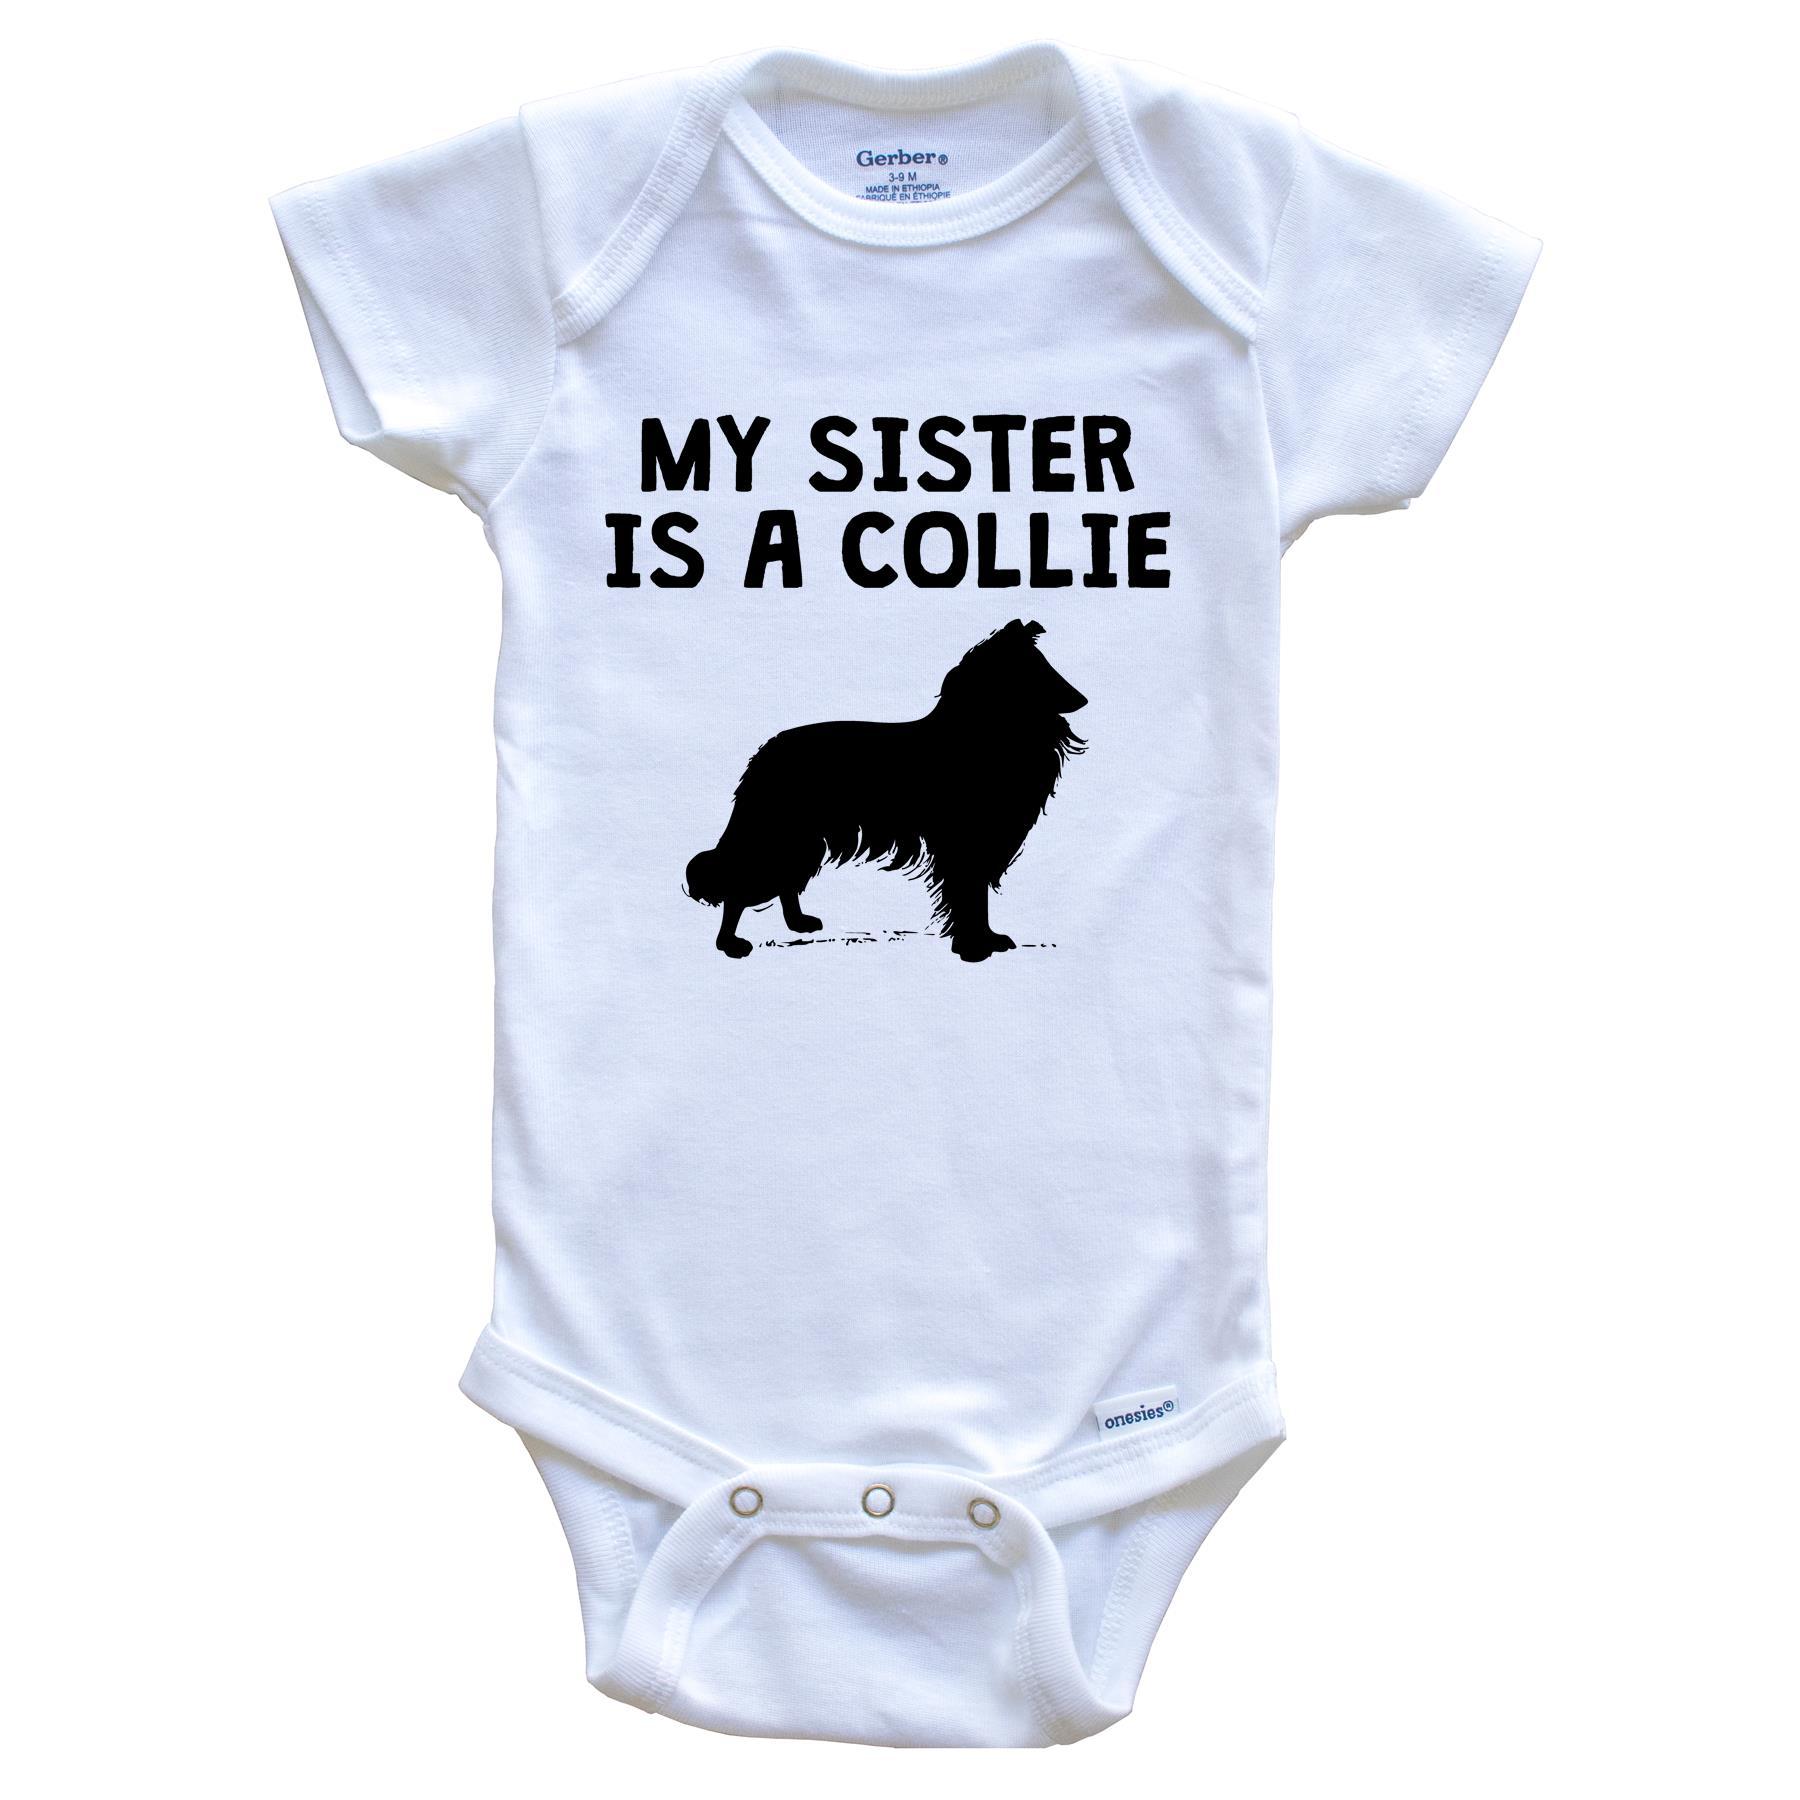 My Sister Is A Collie Baby Onesie